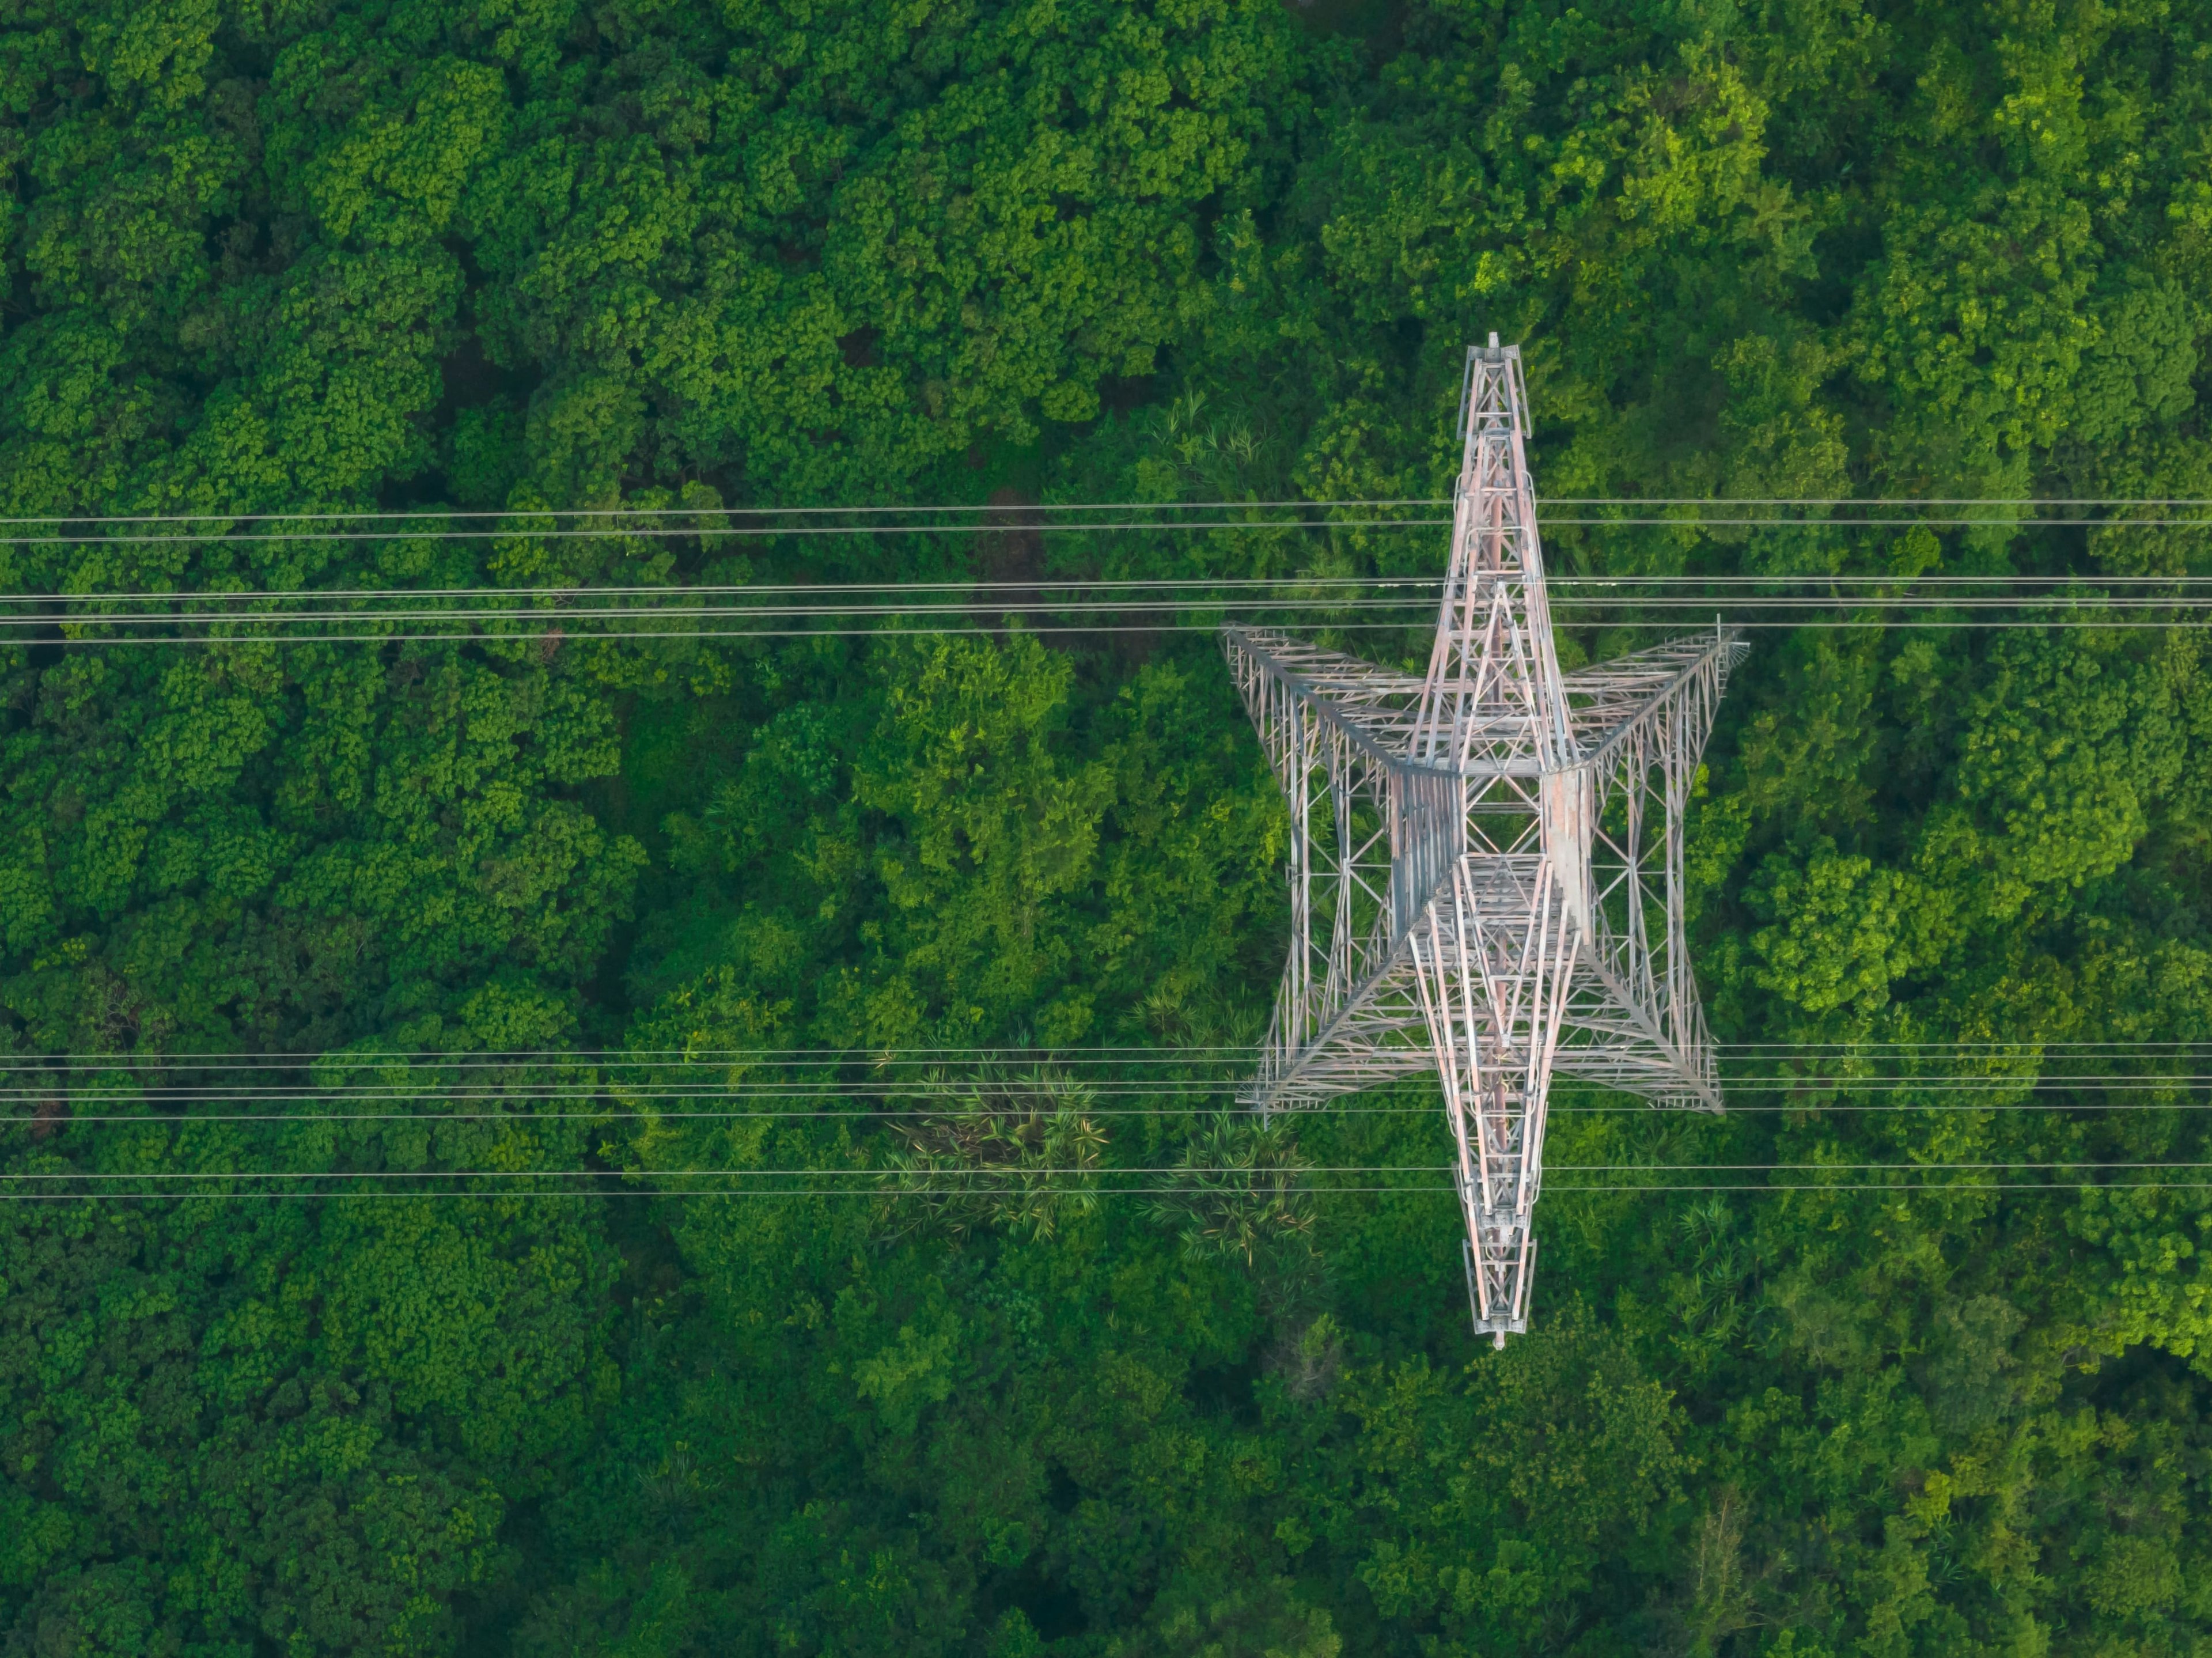 Image of a high-voltage transmission tower